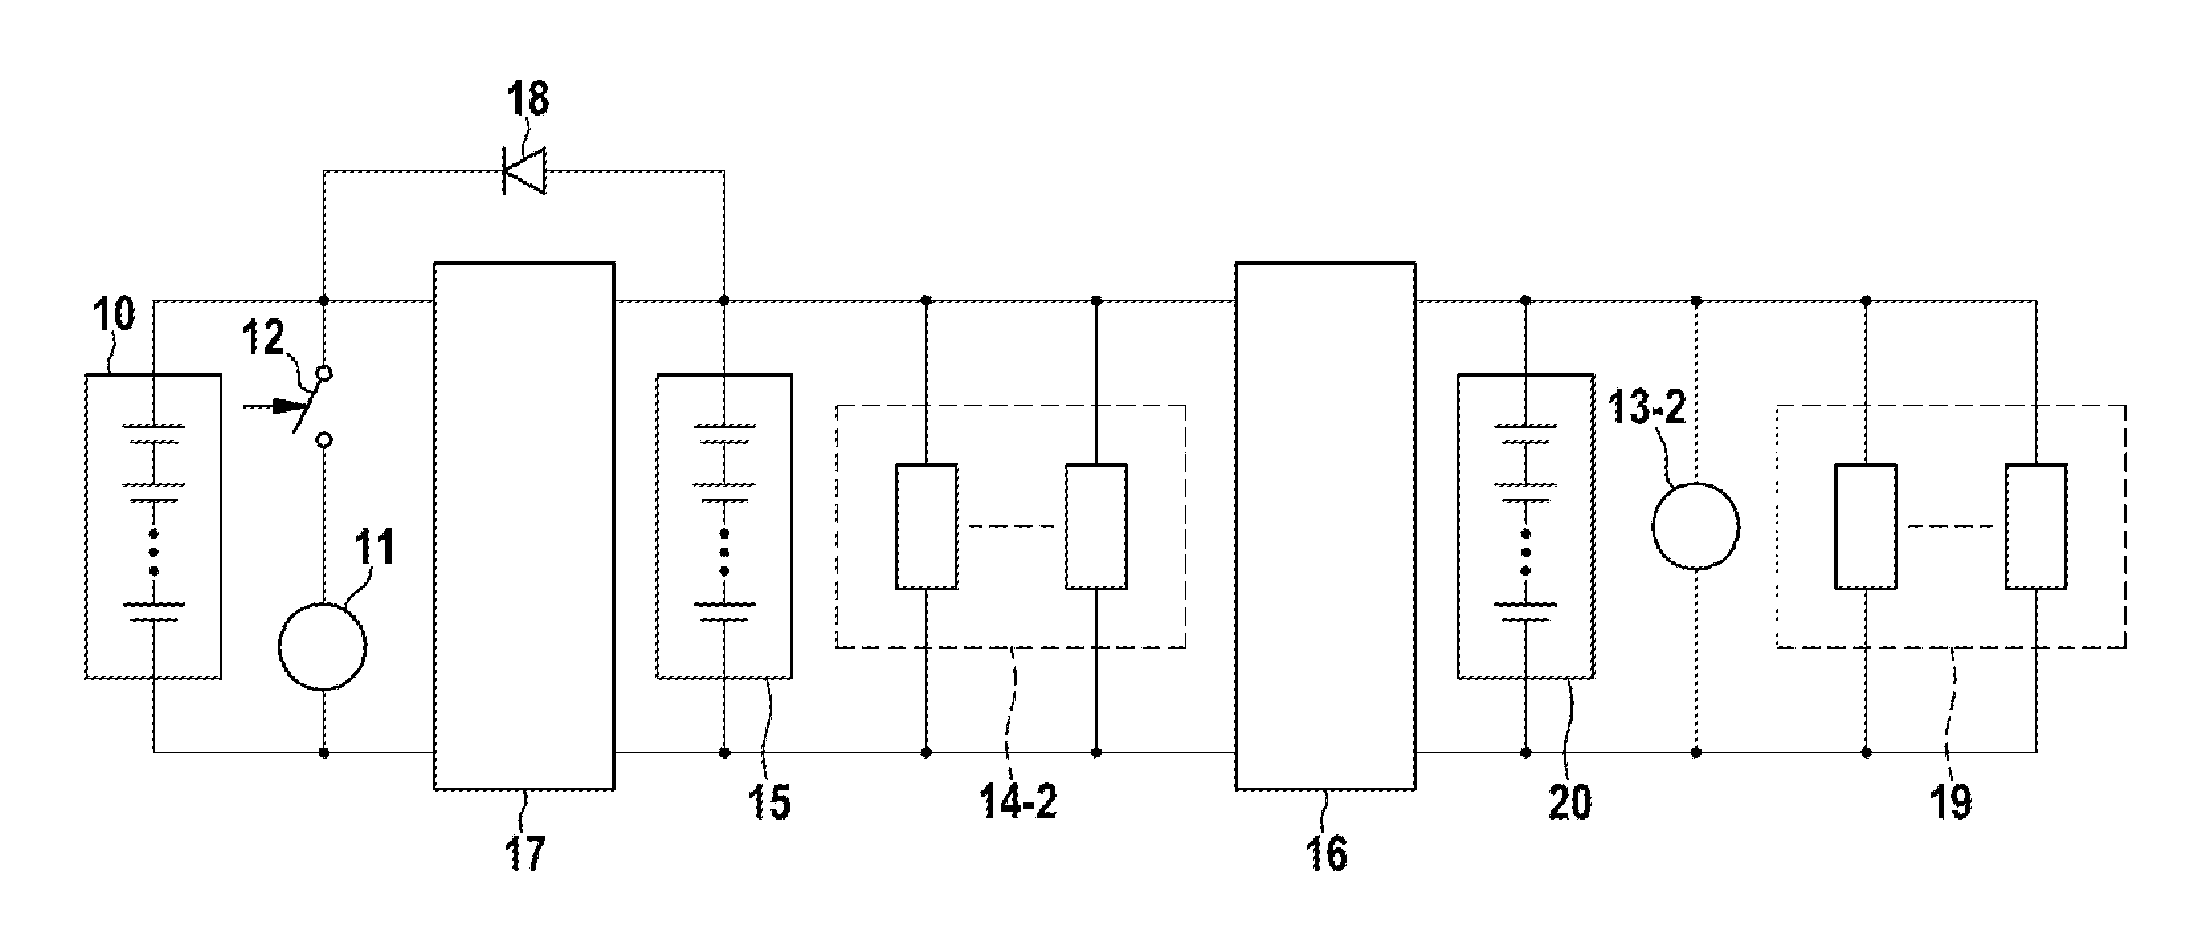 Battery system for micro-hybrid vehicles comprising high-efficiency consumers